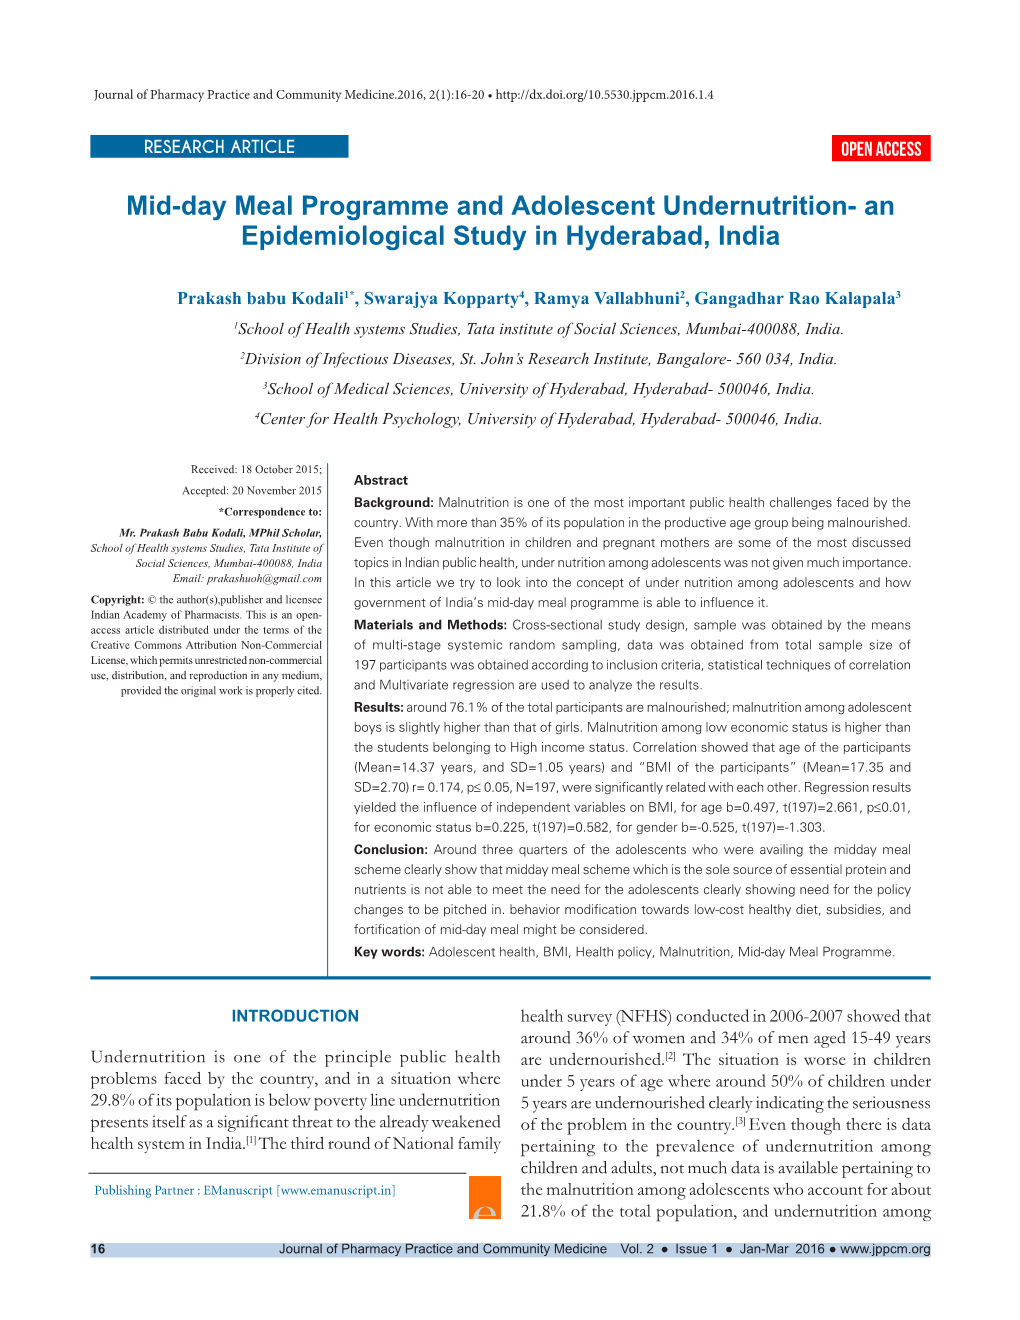 Mid-Day Meal Programme and Adolescent Undernutrition- an Epidemiological Study in Hyderabad, India